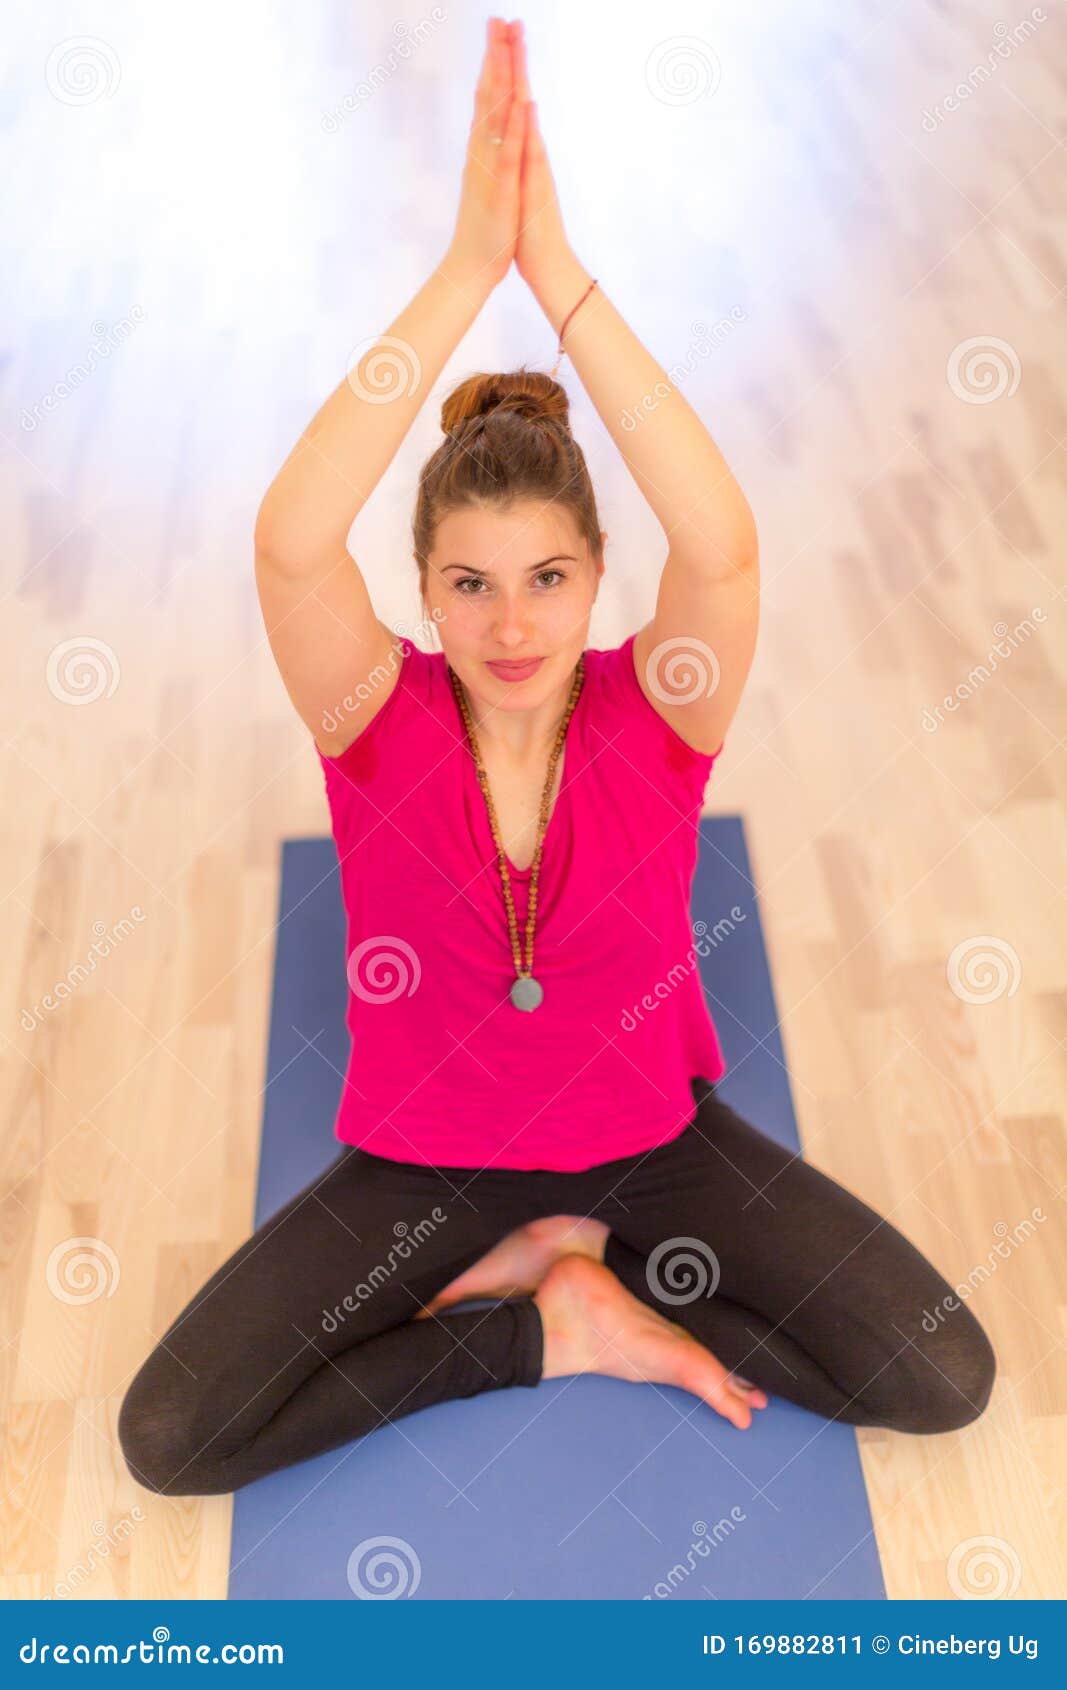 Cropped view of woman sitting cross legged, hands together meditating -  Stock Photo - Dissolve